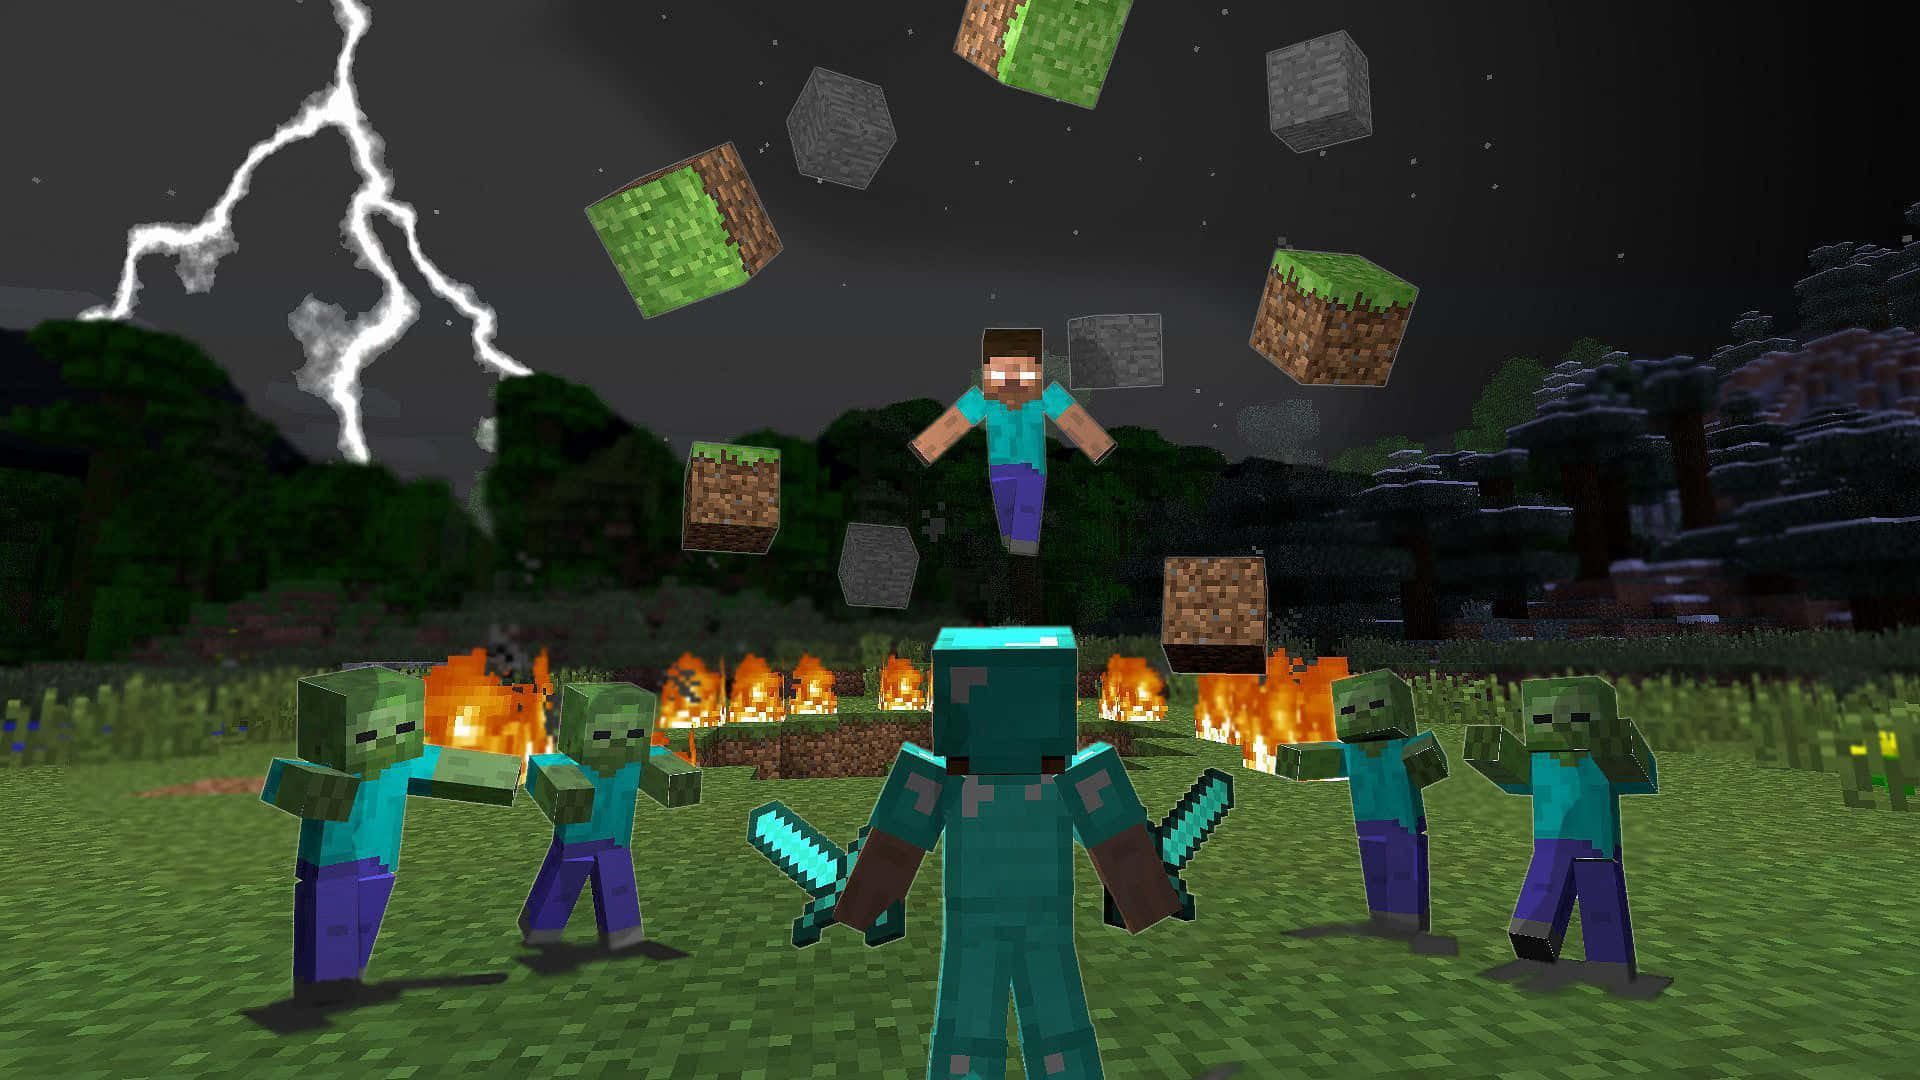 Prepare your weapons to fight the mysterious Herobrine in Minecraft!